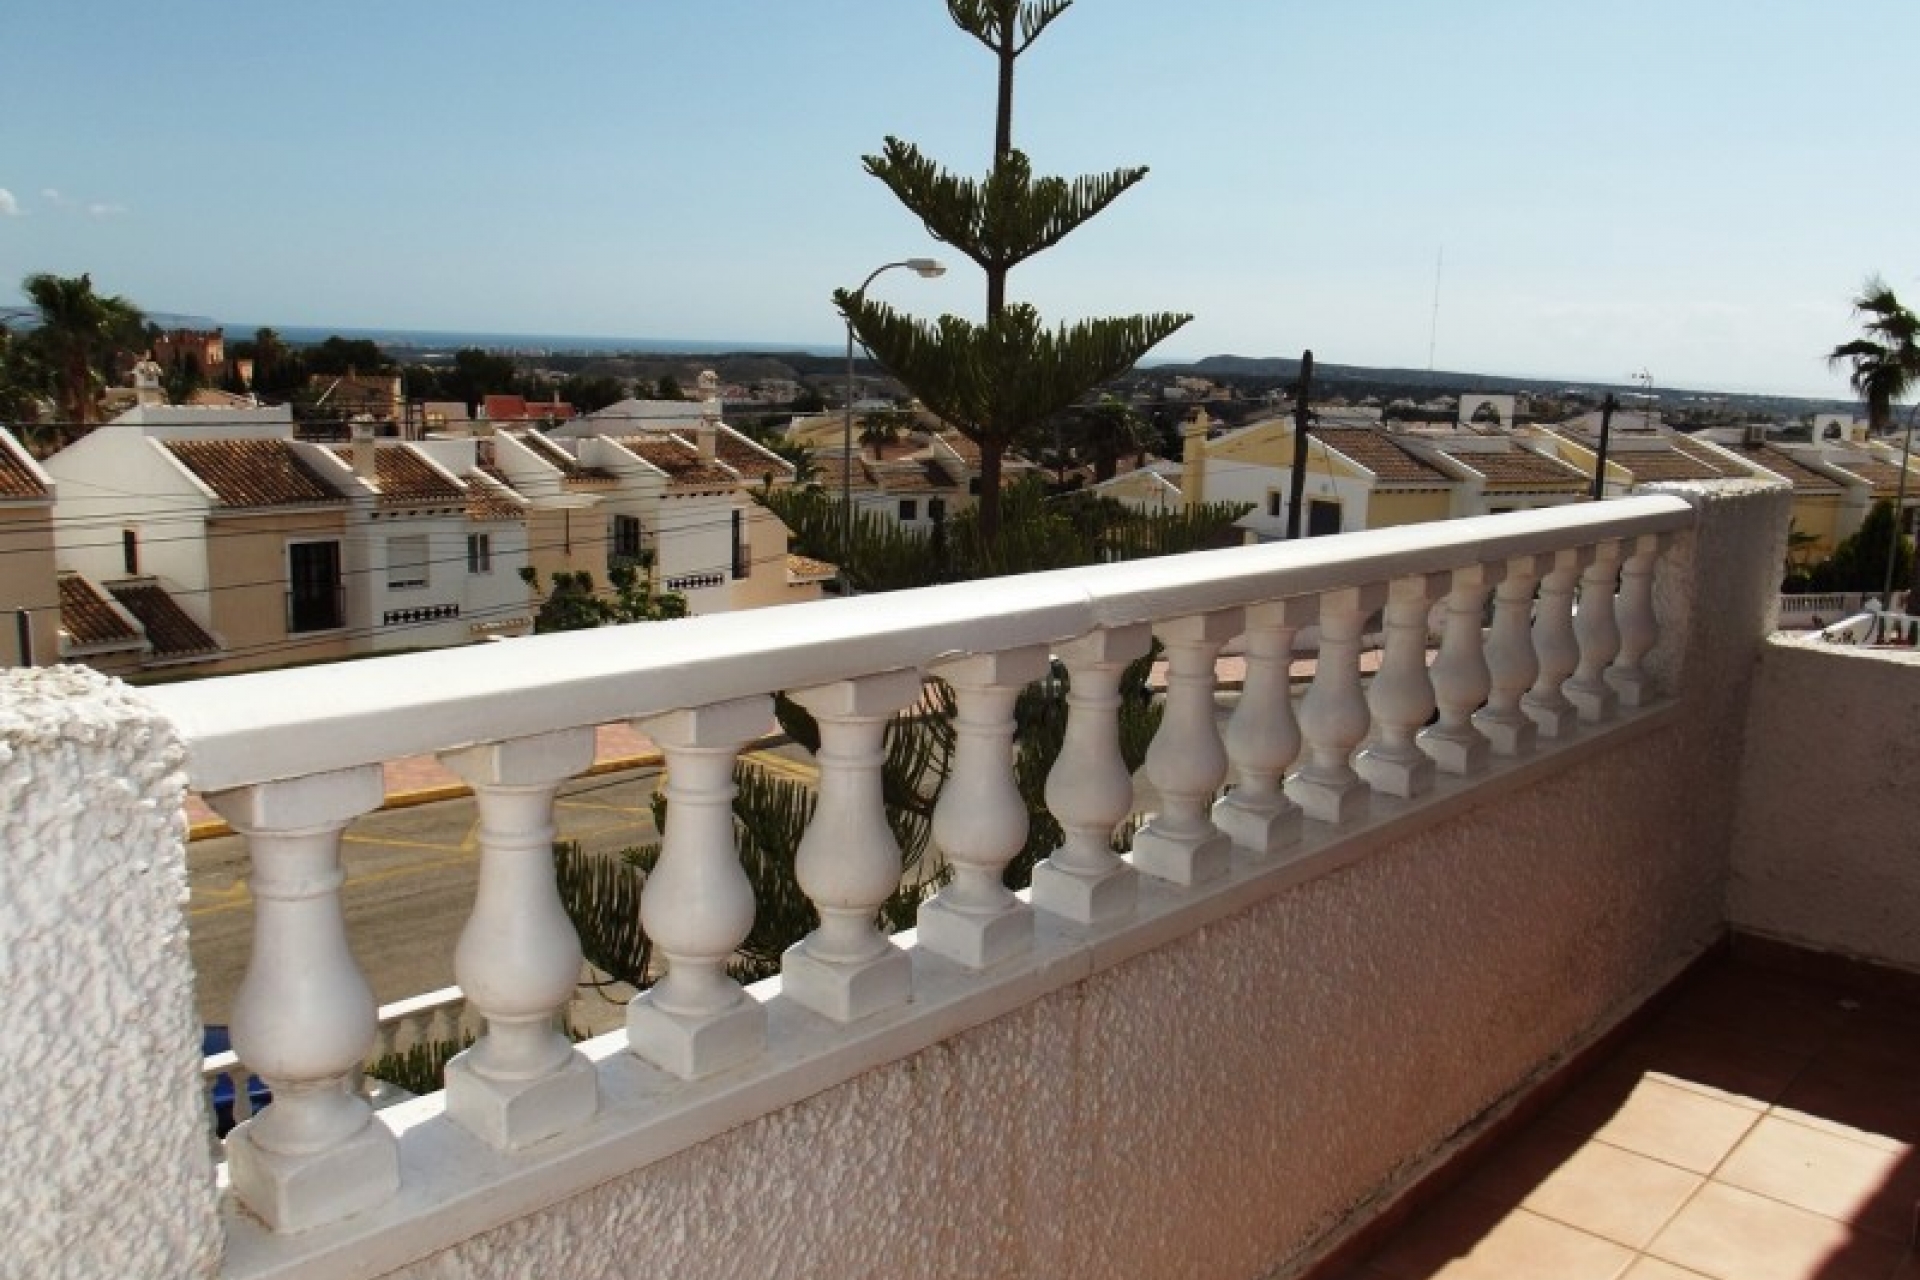 Ciudad Quesada bargain property for sale, cheap property bargain for sale in Quesada, for sale near Torrevieja for sale cheap.